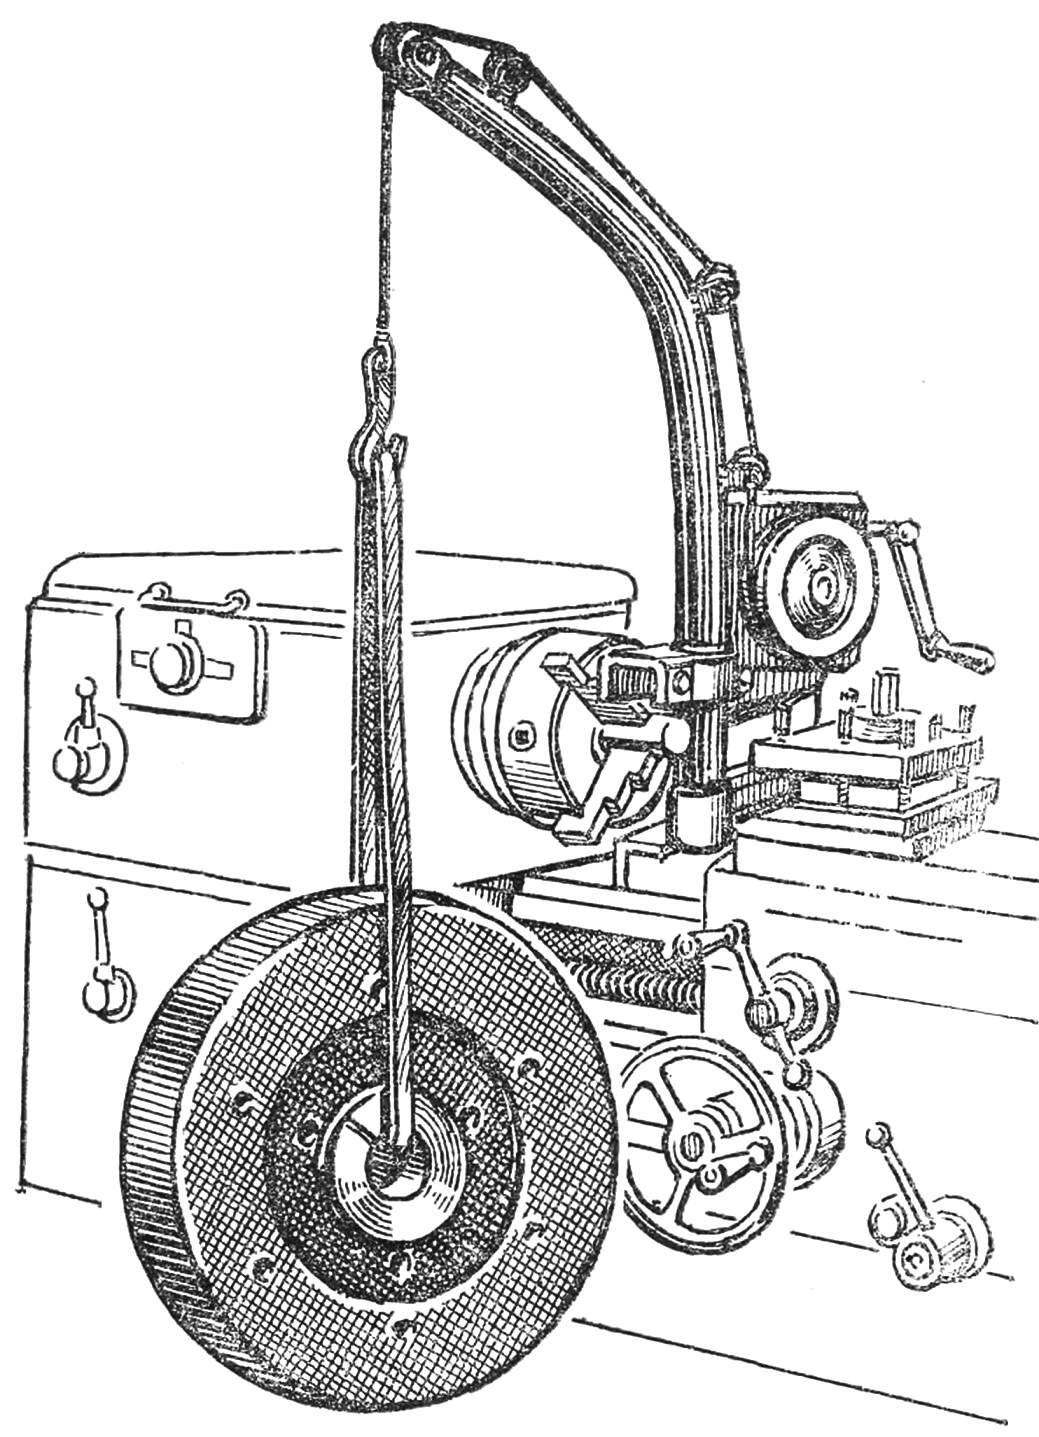 Fig. 1. Miniboden for machine tools